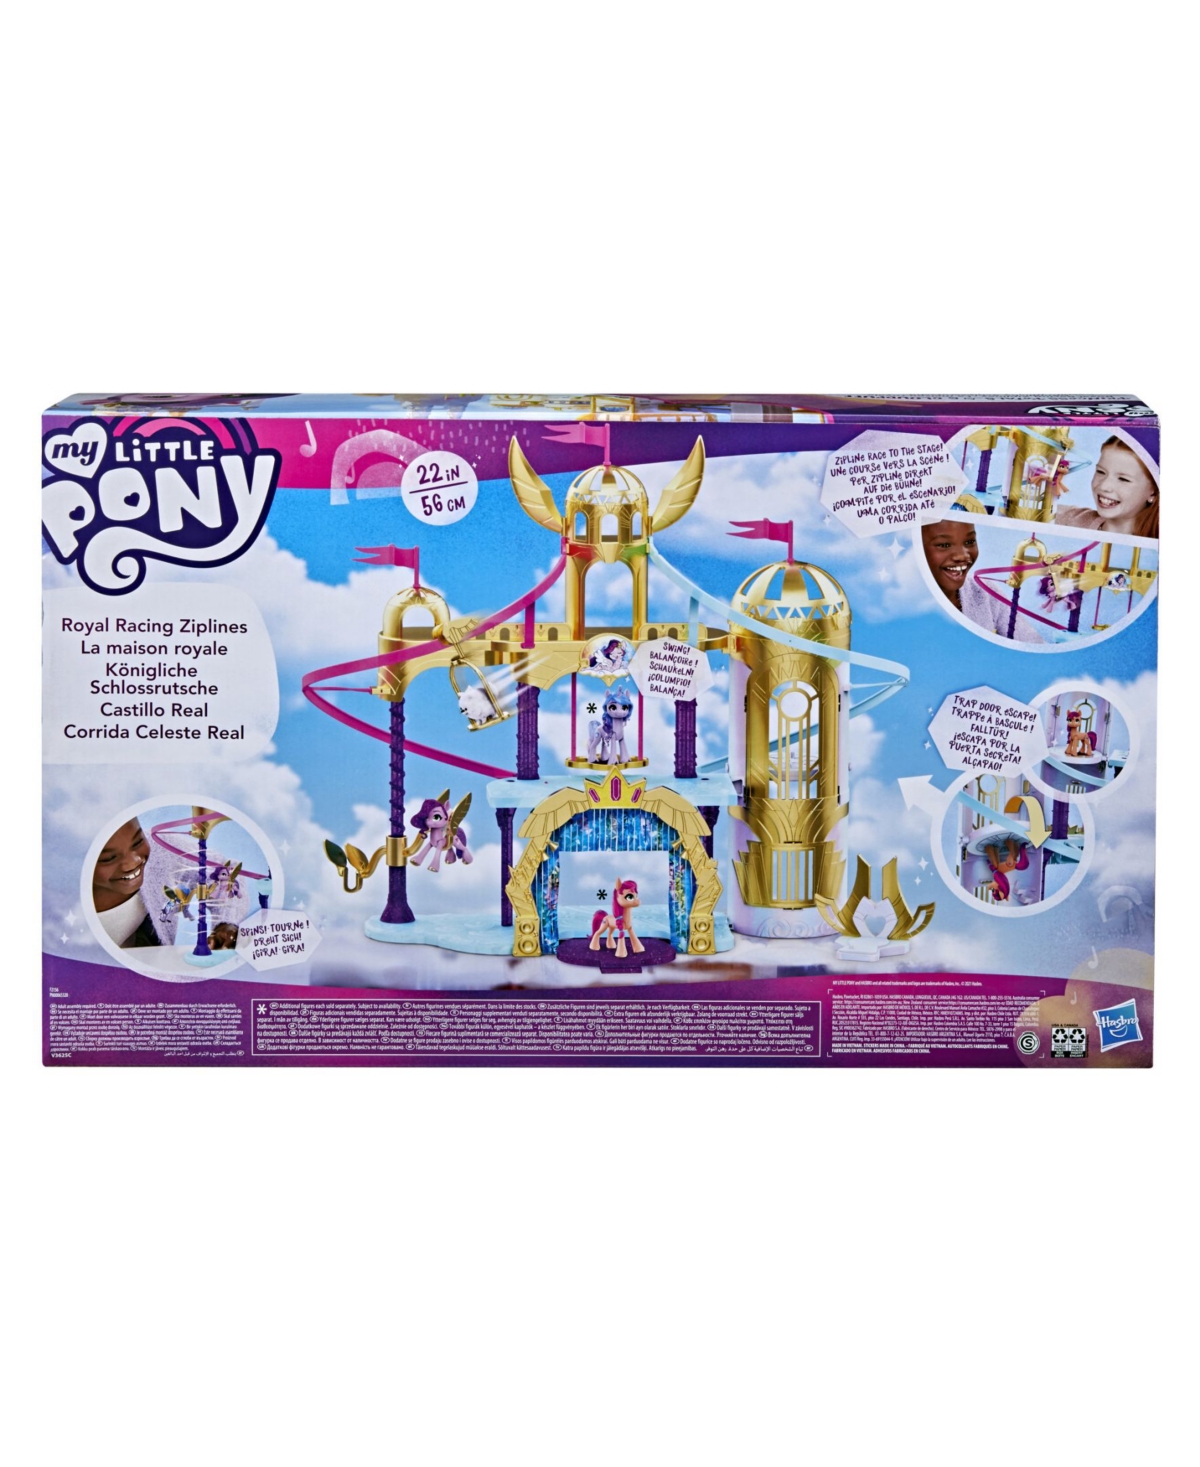 EAN 5010993878468 product image for Closeout! My Little Pony Movie Soaring Shimmer Castle, Set of 12 | upcitemdb.com